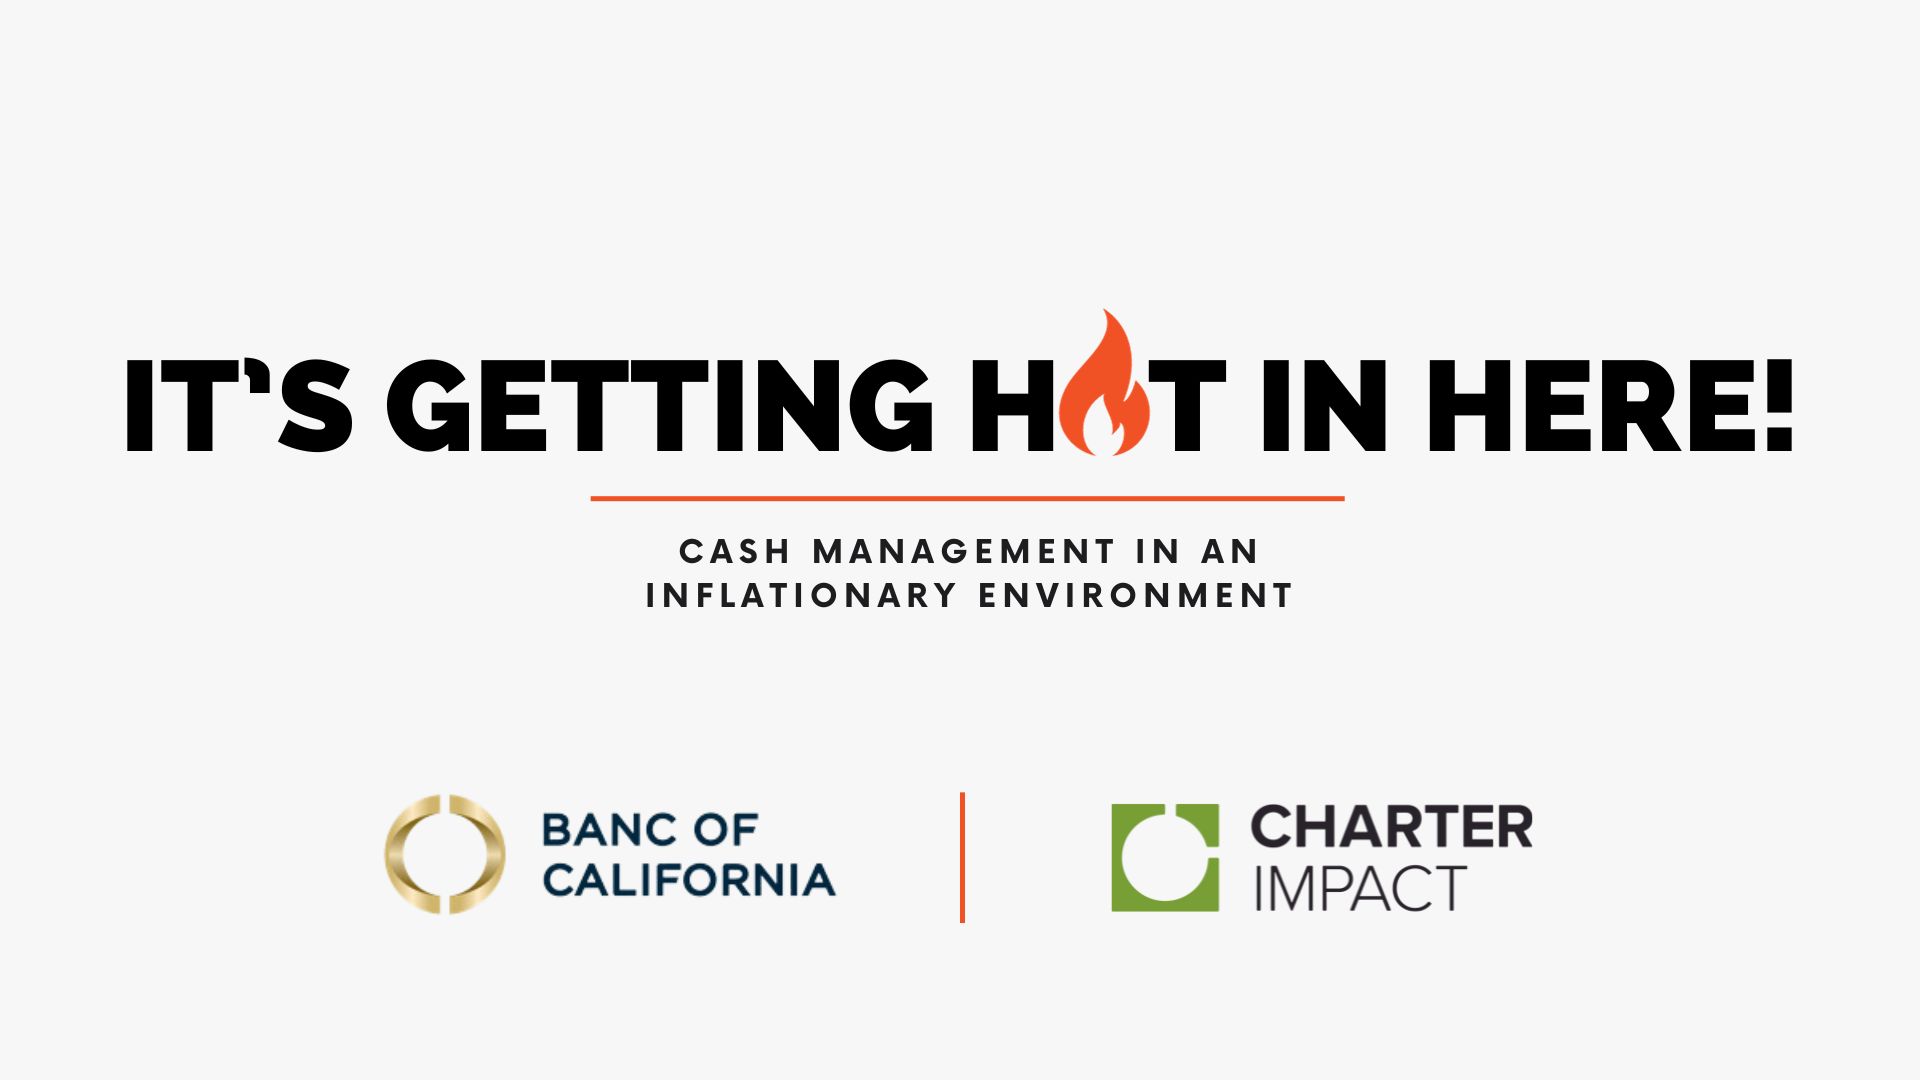 It’s Getting Hot in Here! Cash Management in an Inflationary Environment (1)